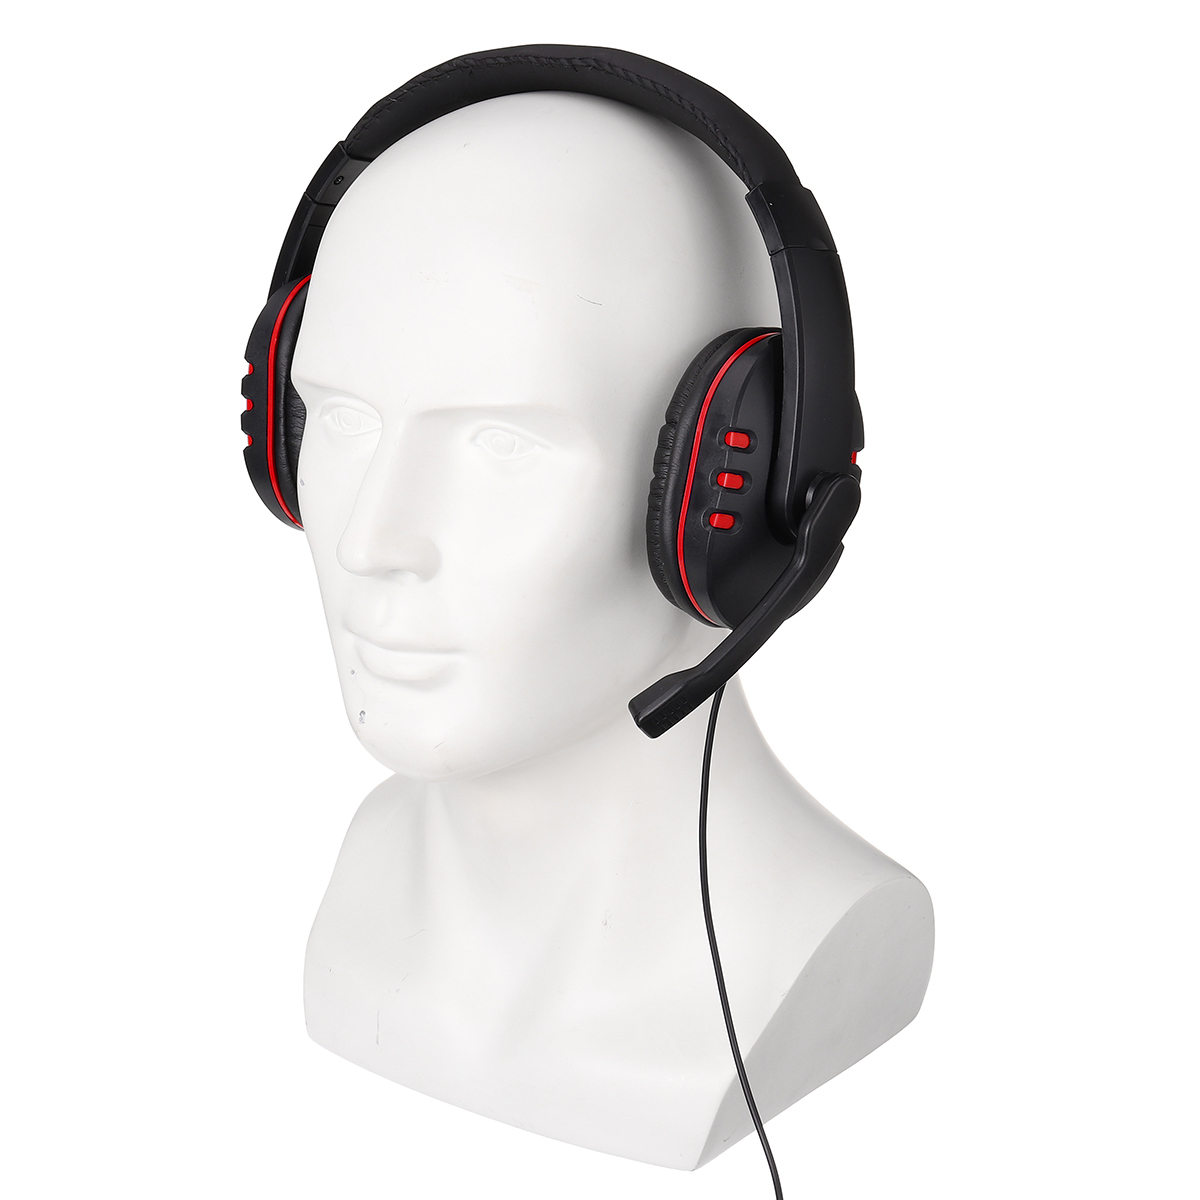 Portable-Gaming-Headset-35mm-Stereo-Surround-Gamer-Wired-Headphone-With-Mic-for-PC-Computer-PS4-Xbox-1699413-4